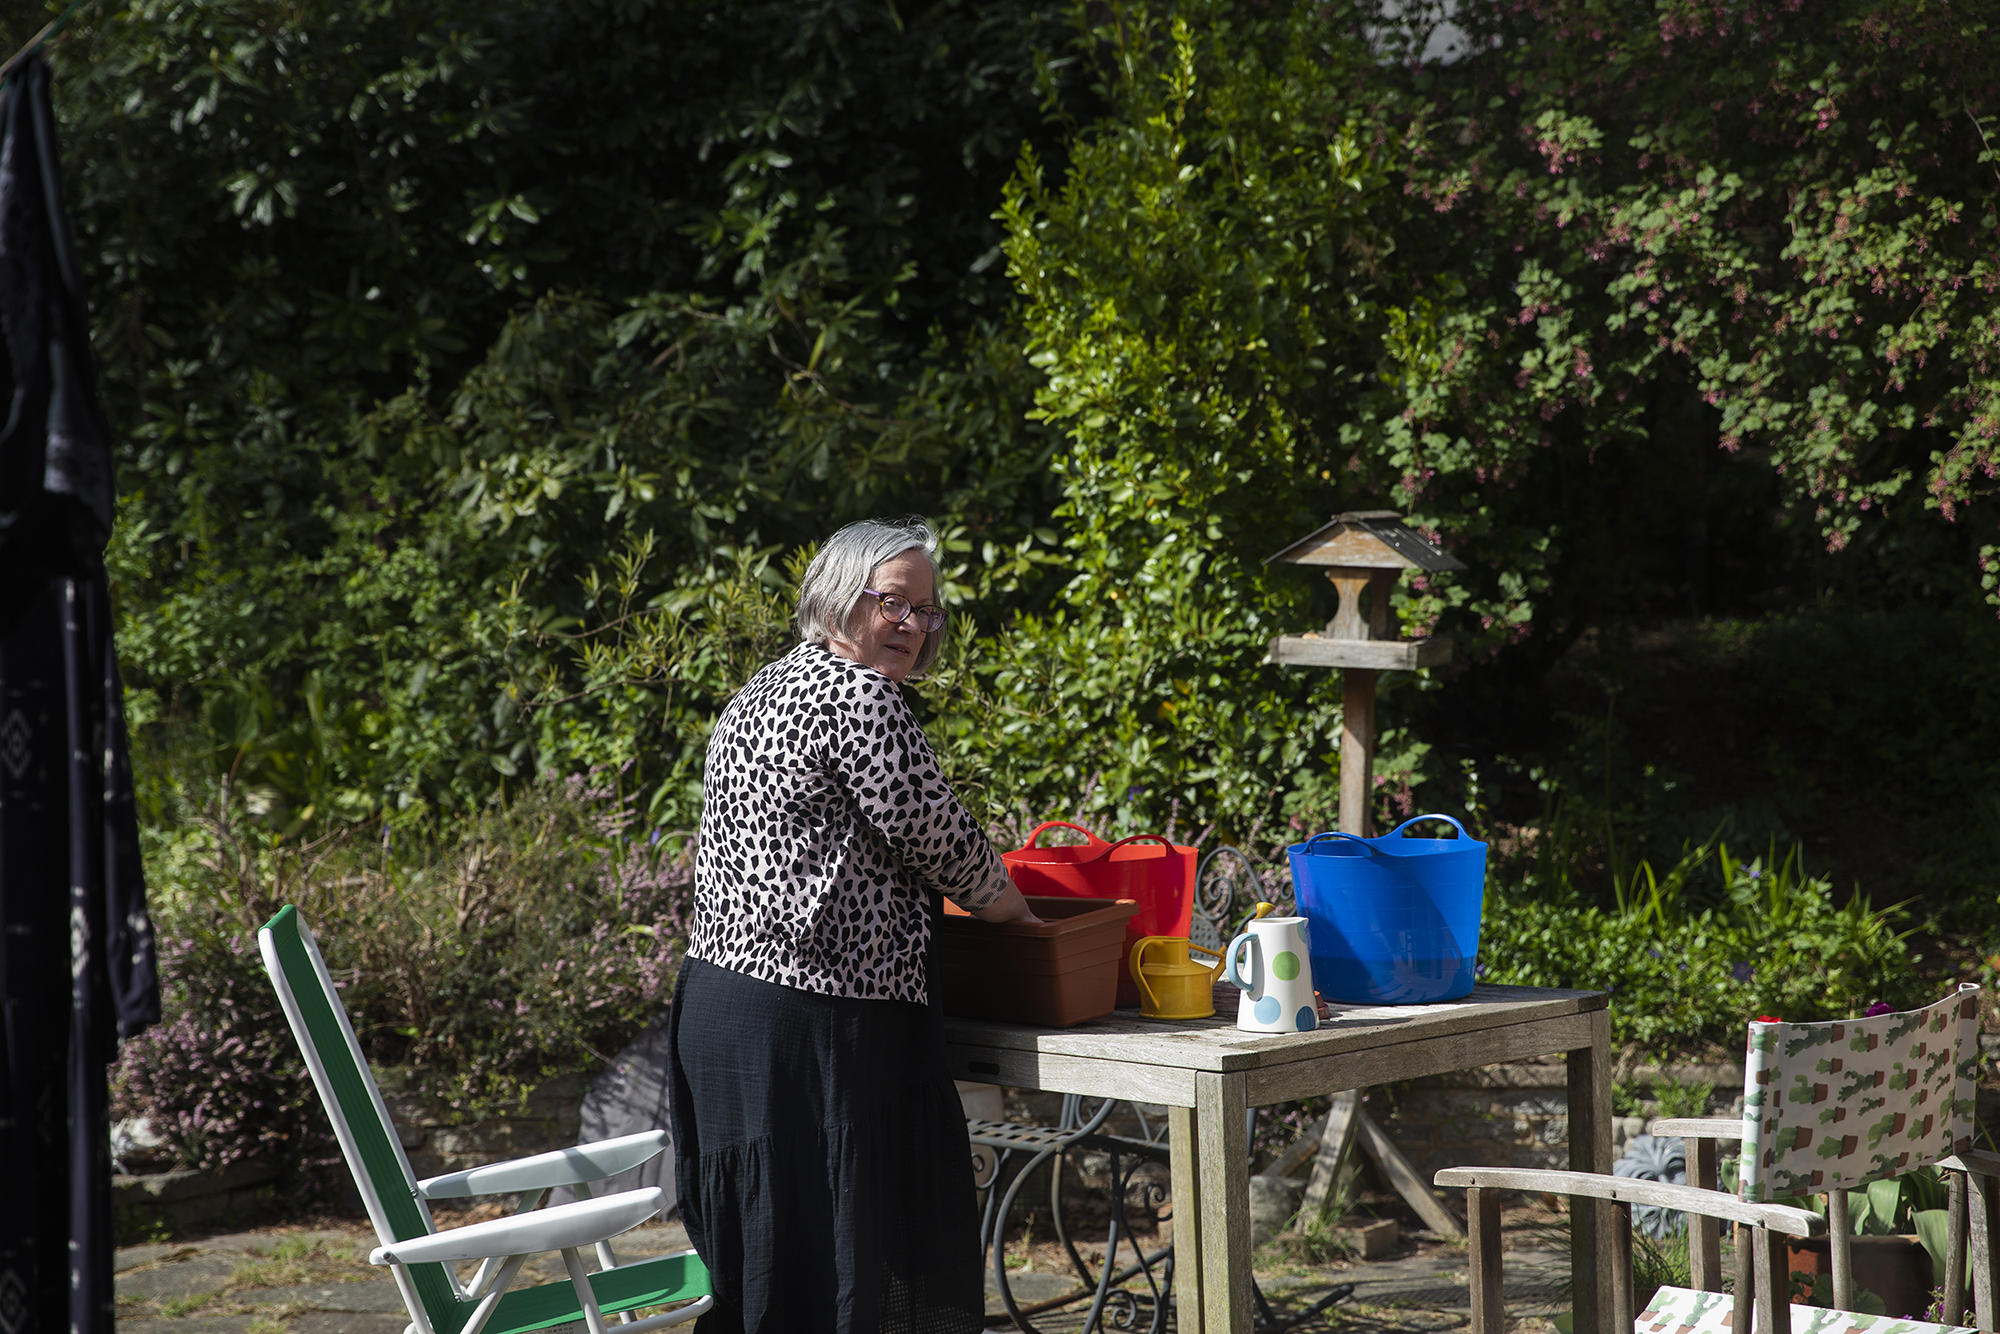 This image by BA Photography Student, Isabella Lamorna, shows her Mum in their garden.